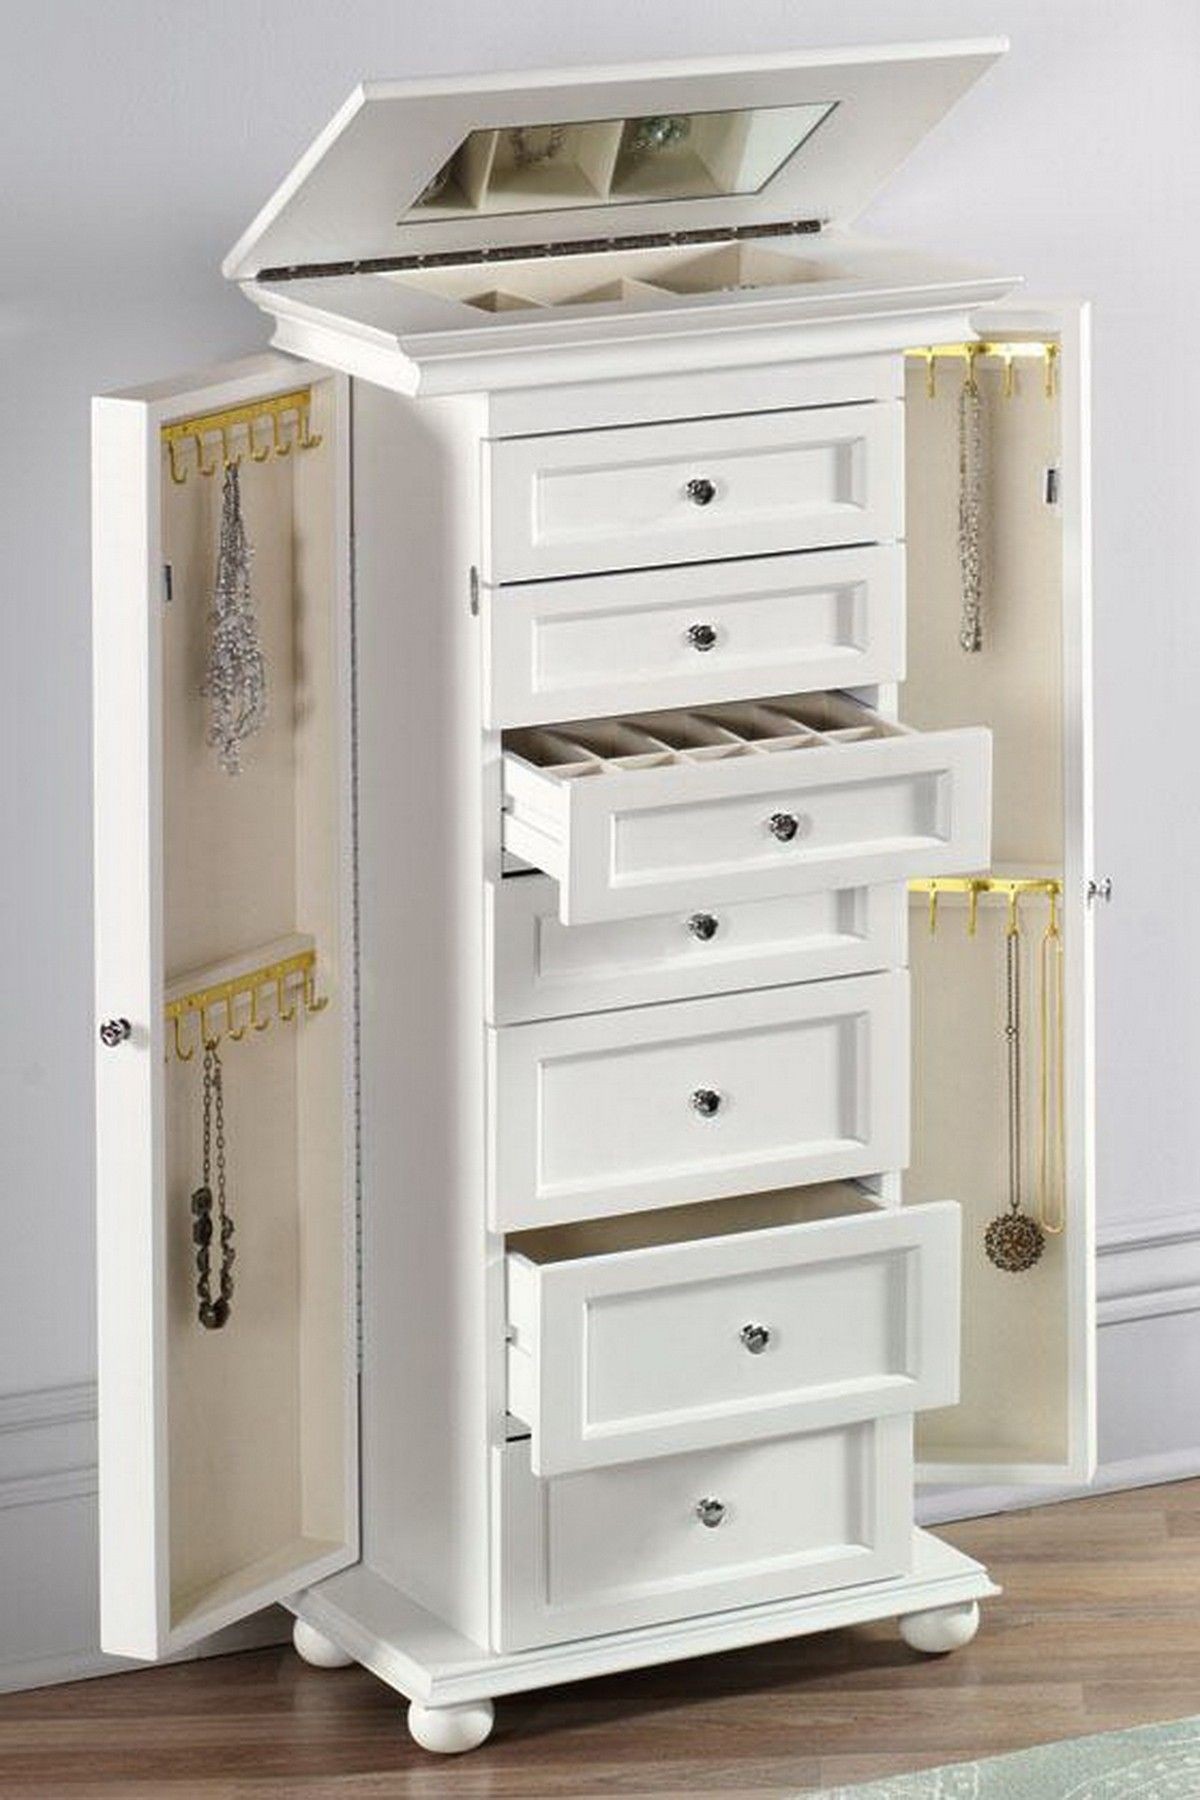 Jewelry armoire large